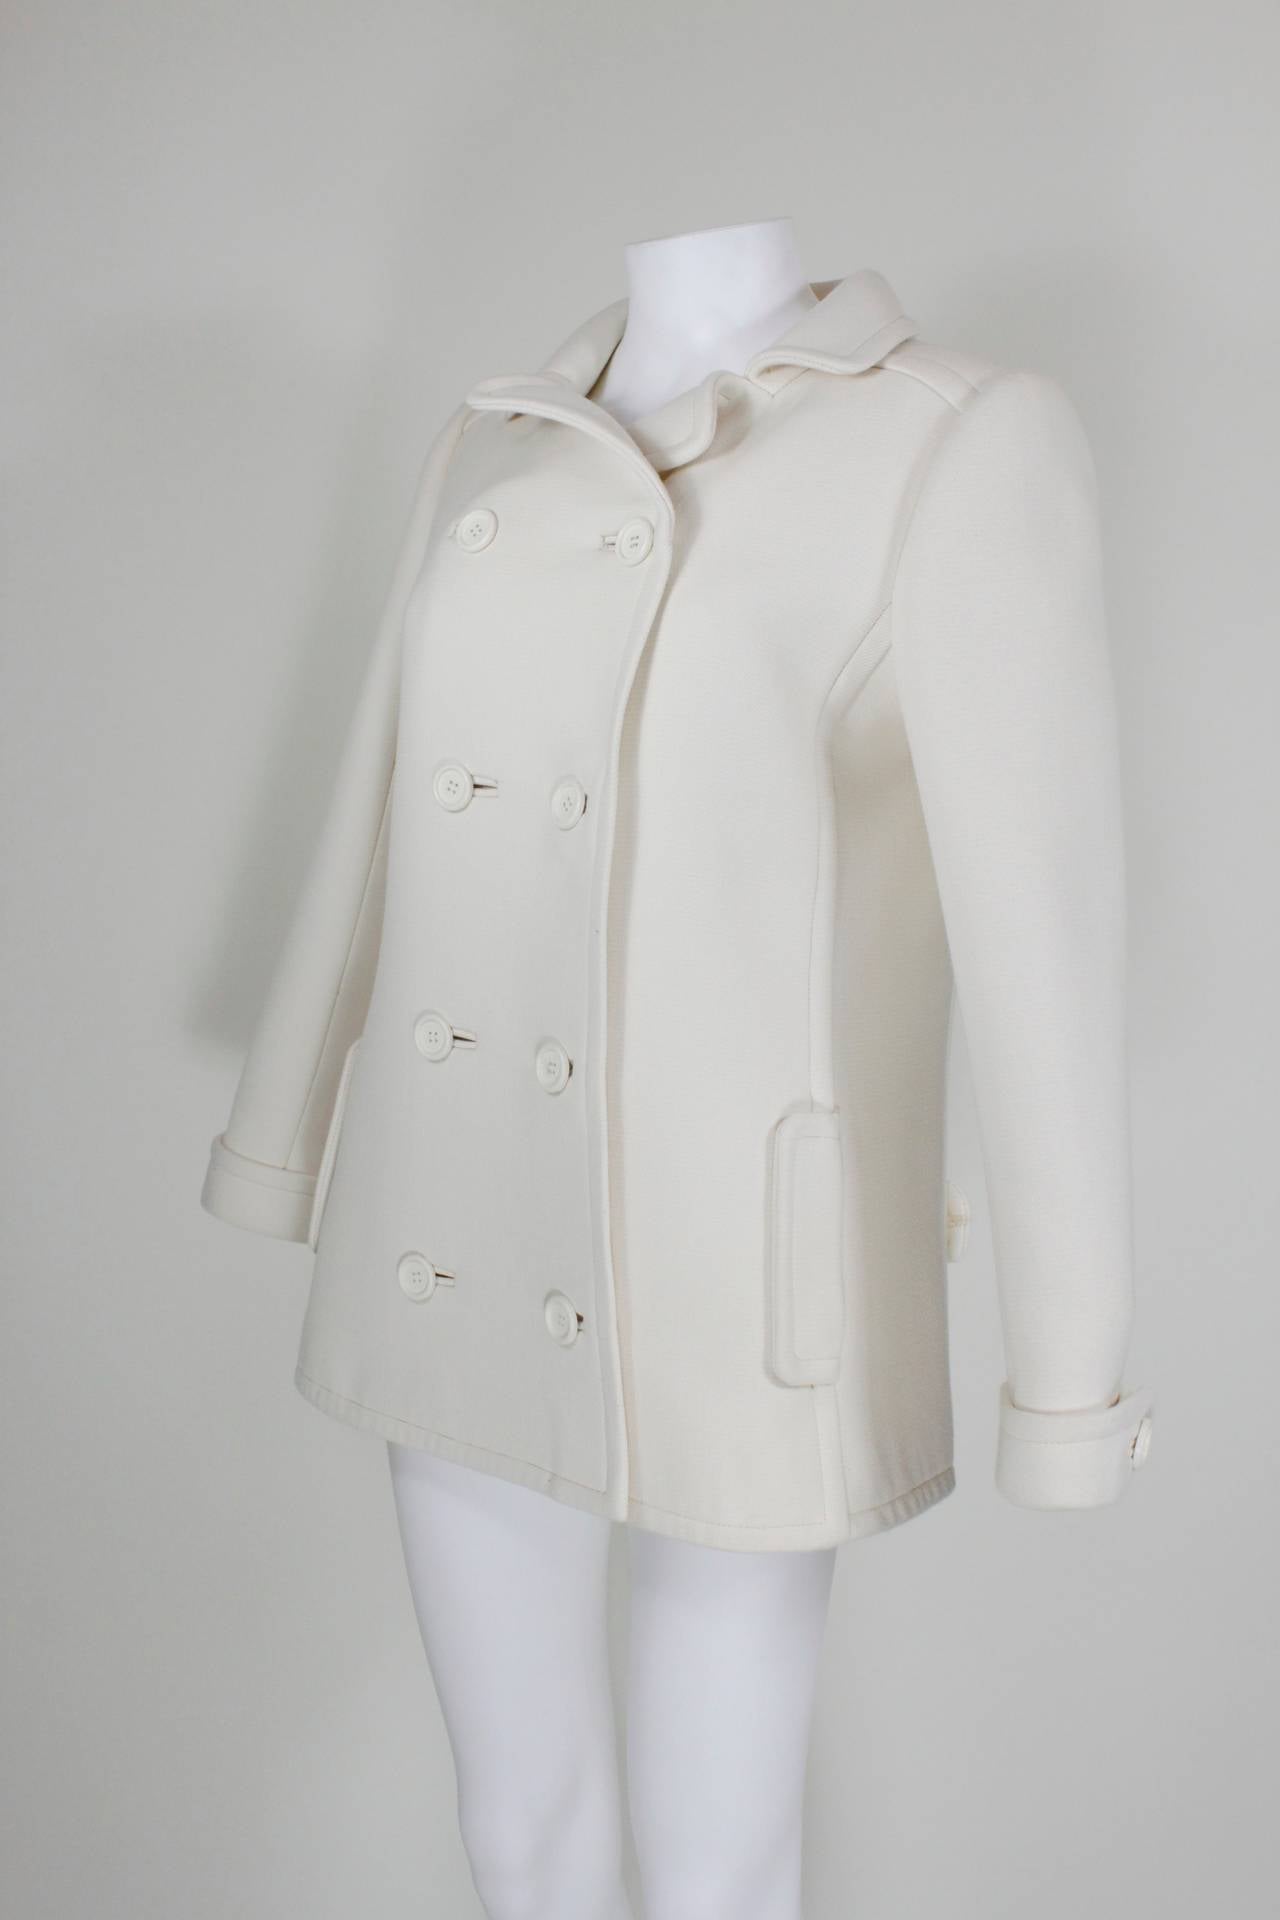 A creme wool peacoat from Courréges, featuring a double-breasted, waist-length silhouette with a collar, cuffed hems, and band across the back. Fully lined. 

Measurements--
Bust: up to 40 inches
Waist: up to 38 inches
Hip: up to 42